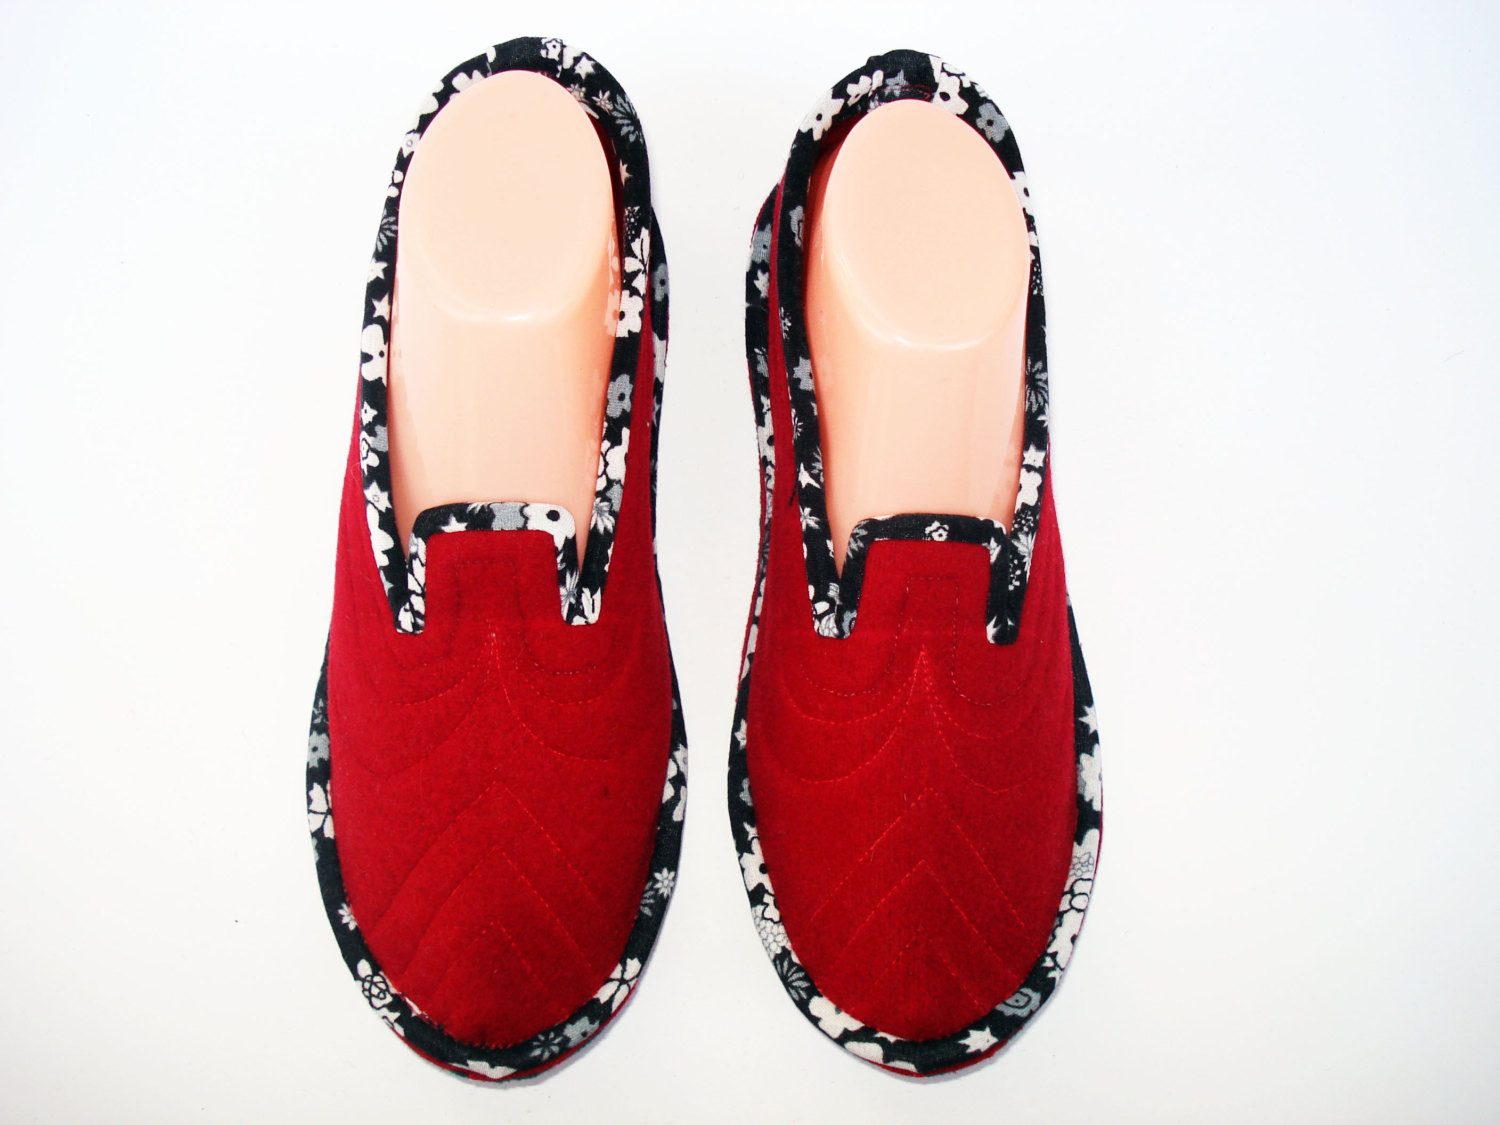 Bedroom Shoes Womens
 Red Womens Slippers Home Slippers House Slippers Bedroom